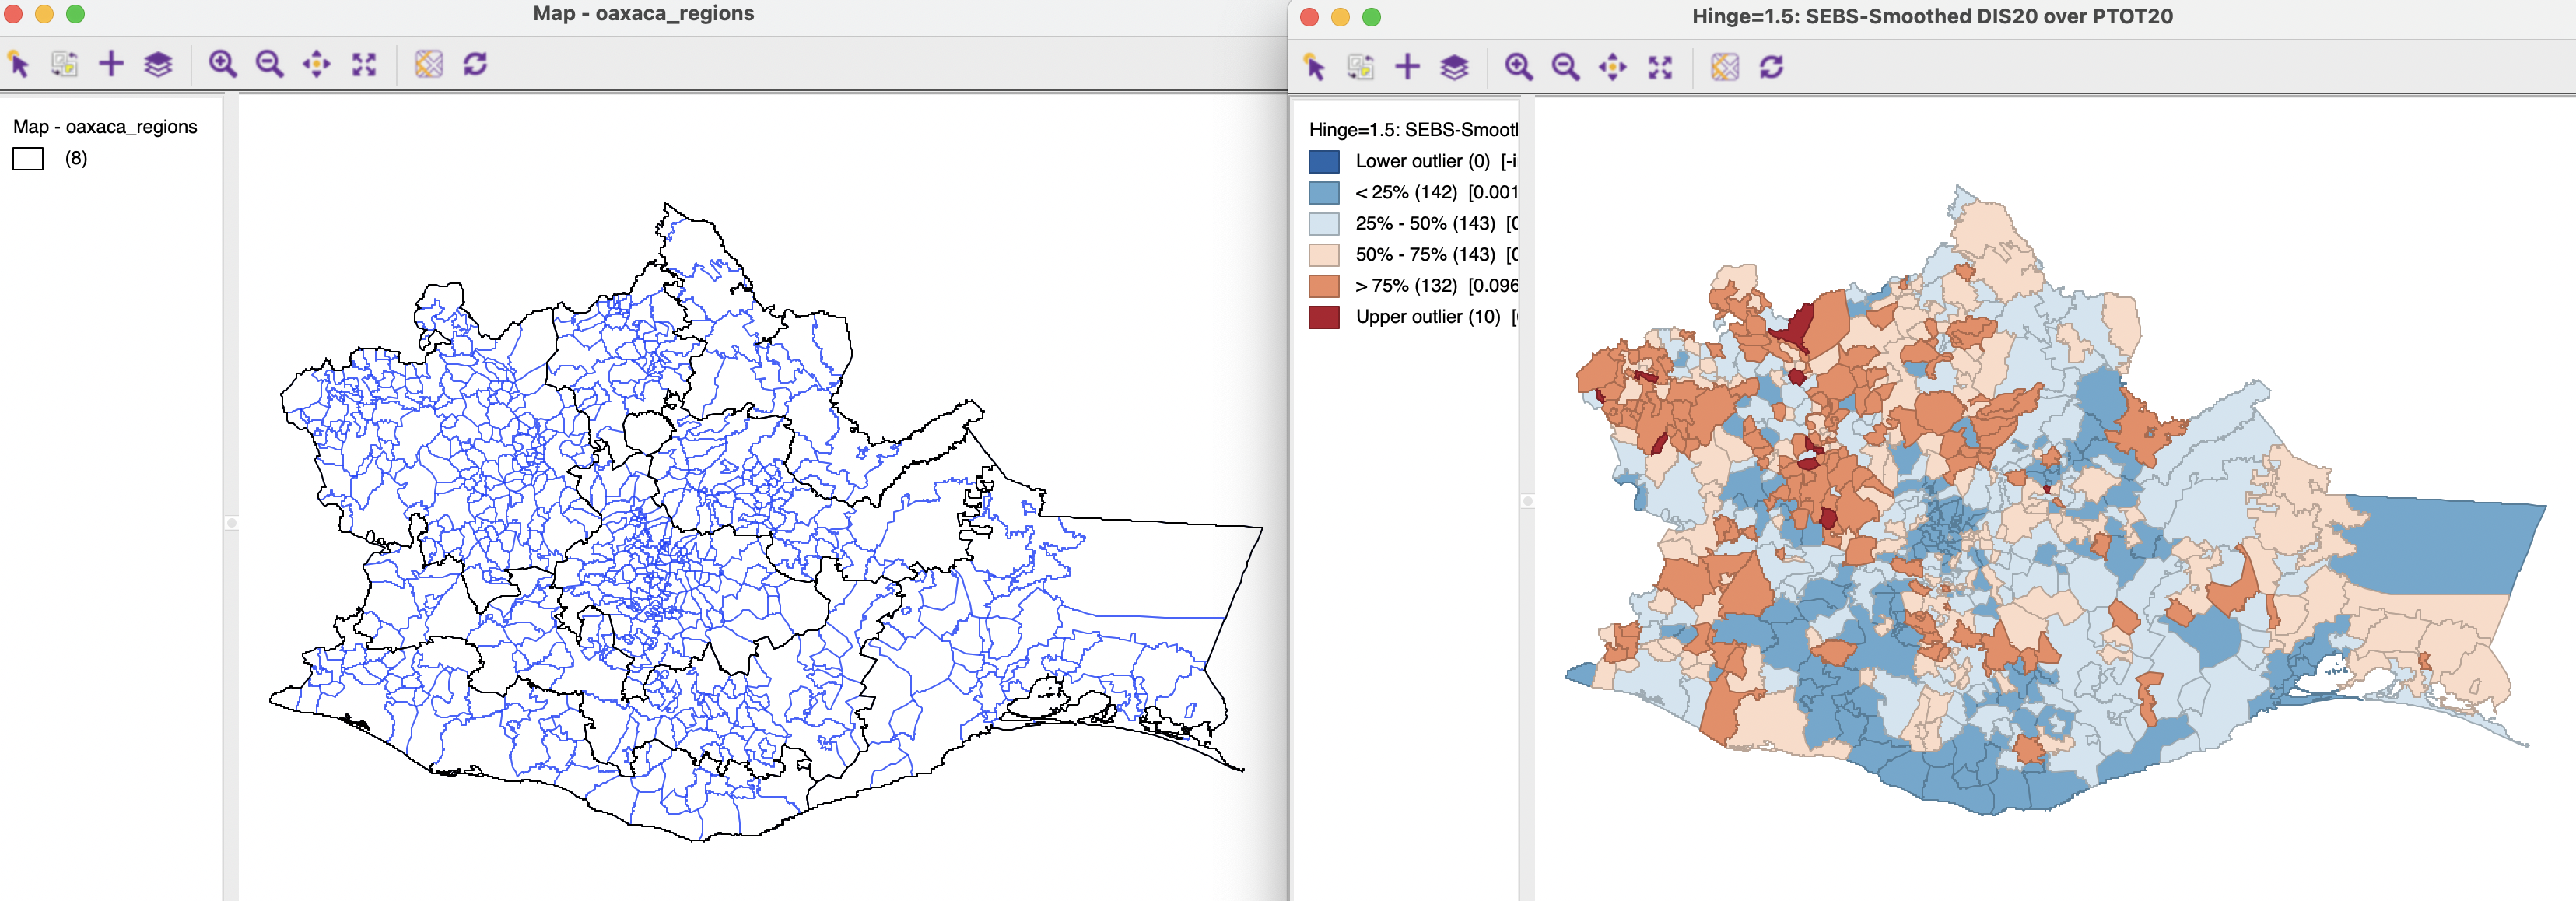 Spatial Empirical Bayes smoothed rate map using region block weights